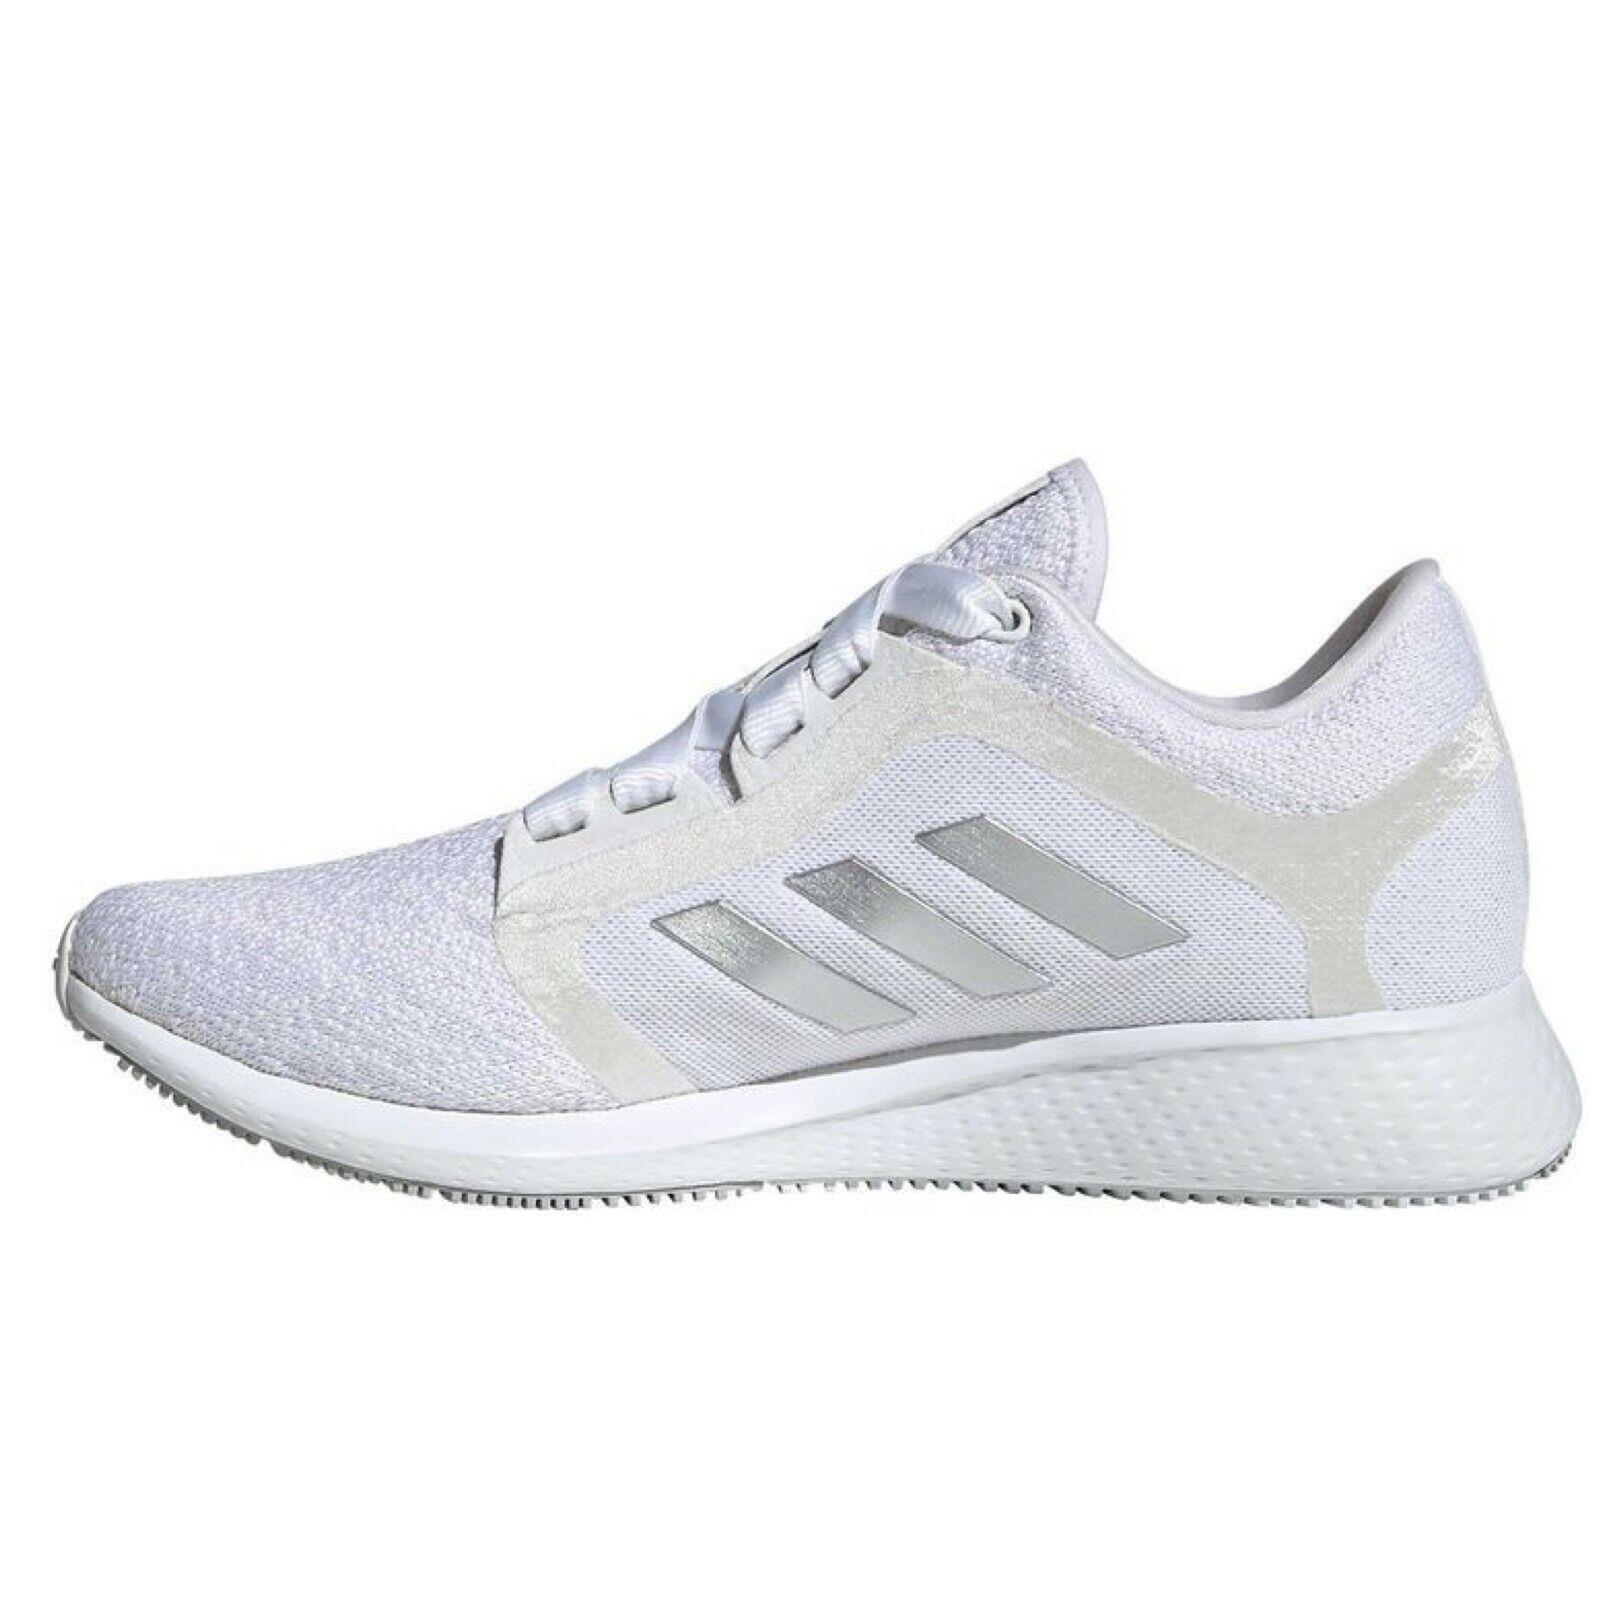 Adidas shoes Edge Lux - White , WHITE/SILVER Manufacturer 9